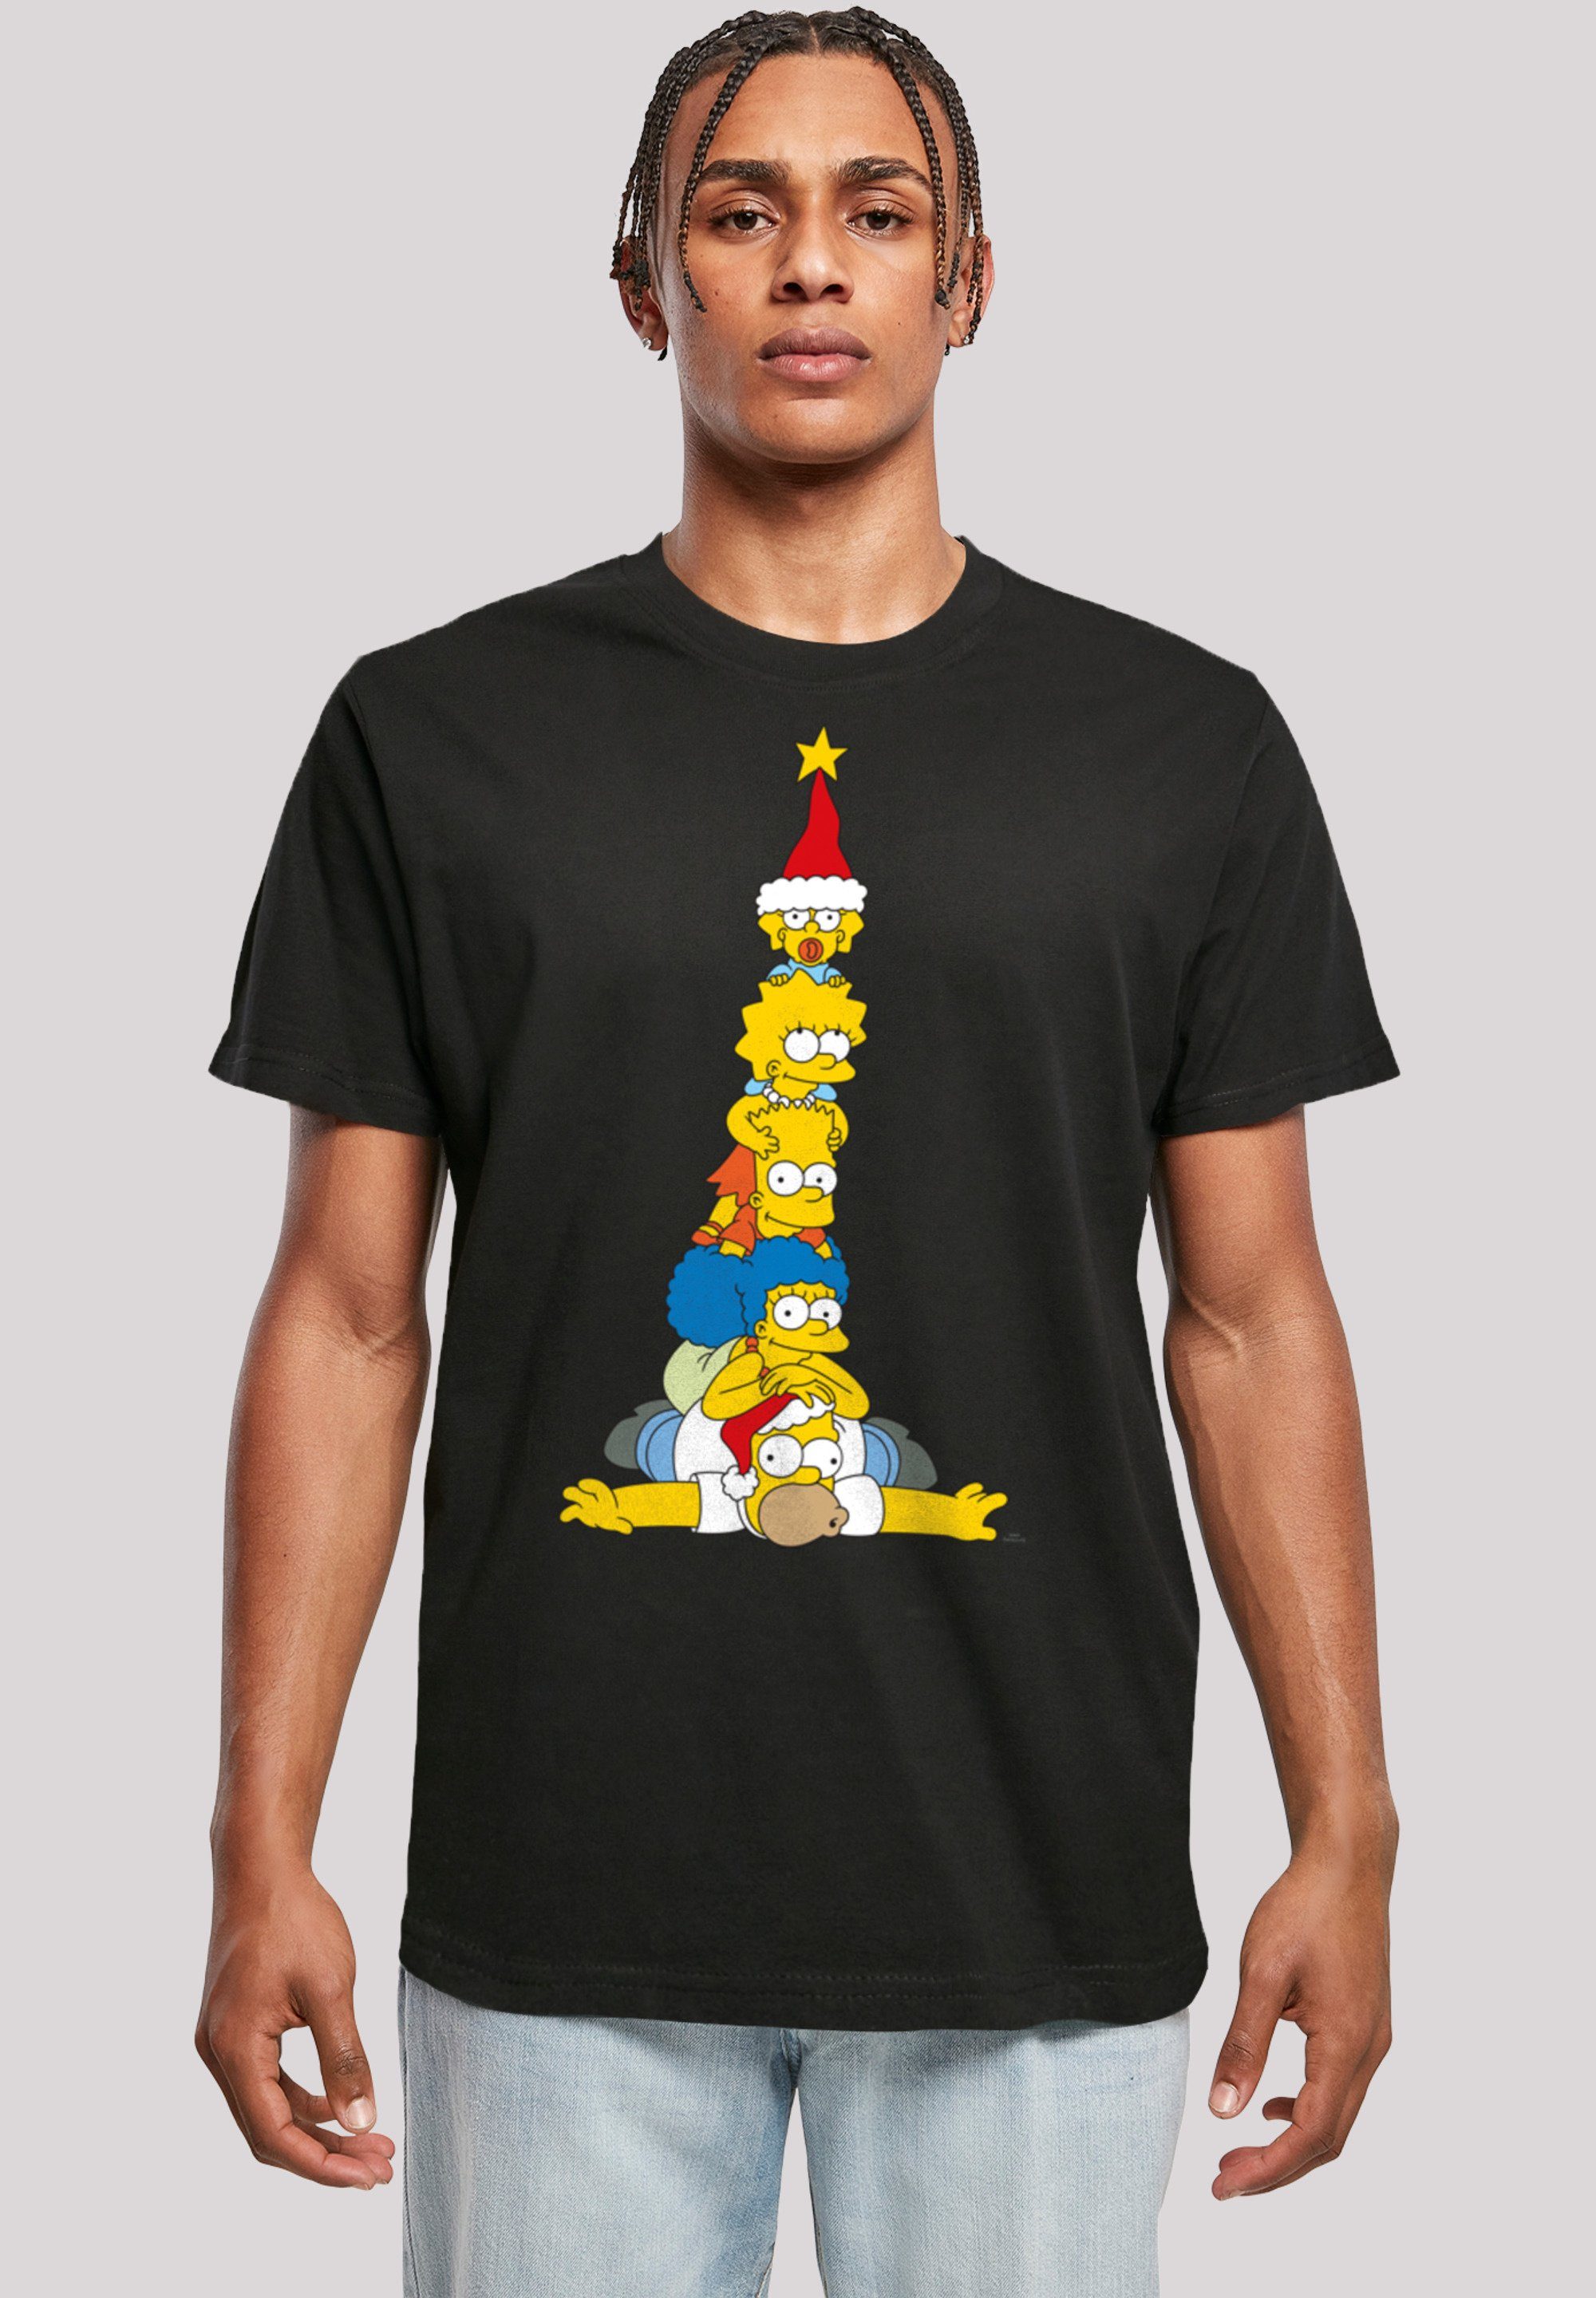 F4NT4STIC T-Shirt The Simpsons Christmas schwarz Weihnachtsbaum Family Print